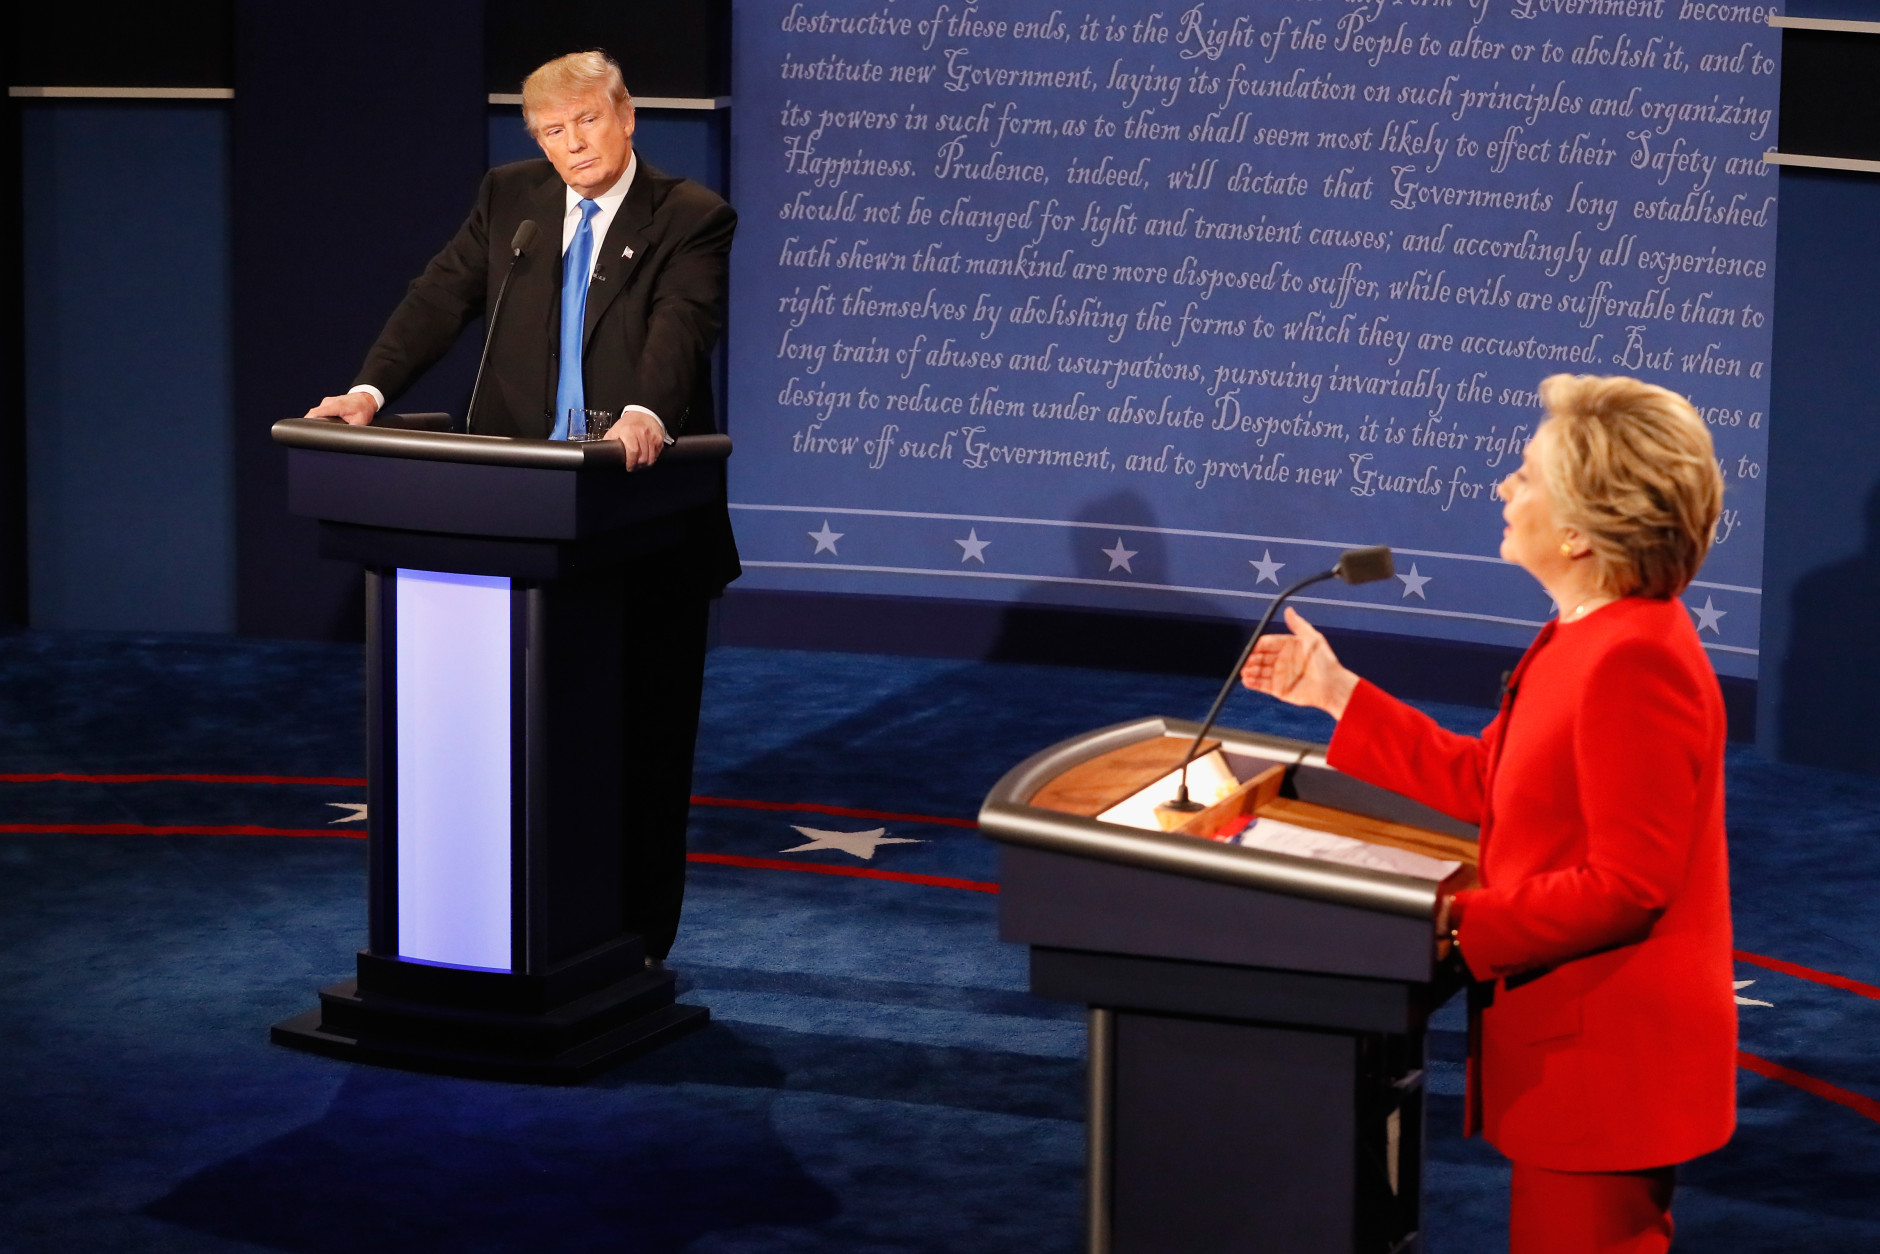 HEMPSTEAD, NY - SEPTEMBER 26:  Democratic presidential nominee Hillary Clinton (R) speaks as Republican presidential nominee Donald Trump (L) listens during the Presidential Debate at Hofstra University on September 26, 2016 in Hempstead, New York.  The first of four debates for the 2016 Election, three Presidential and one Vice Presidential, is moderated by NBC's Lester Holt.  (Photo by Pool/Getty Images)